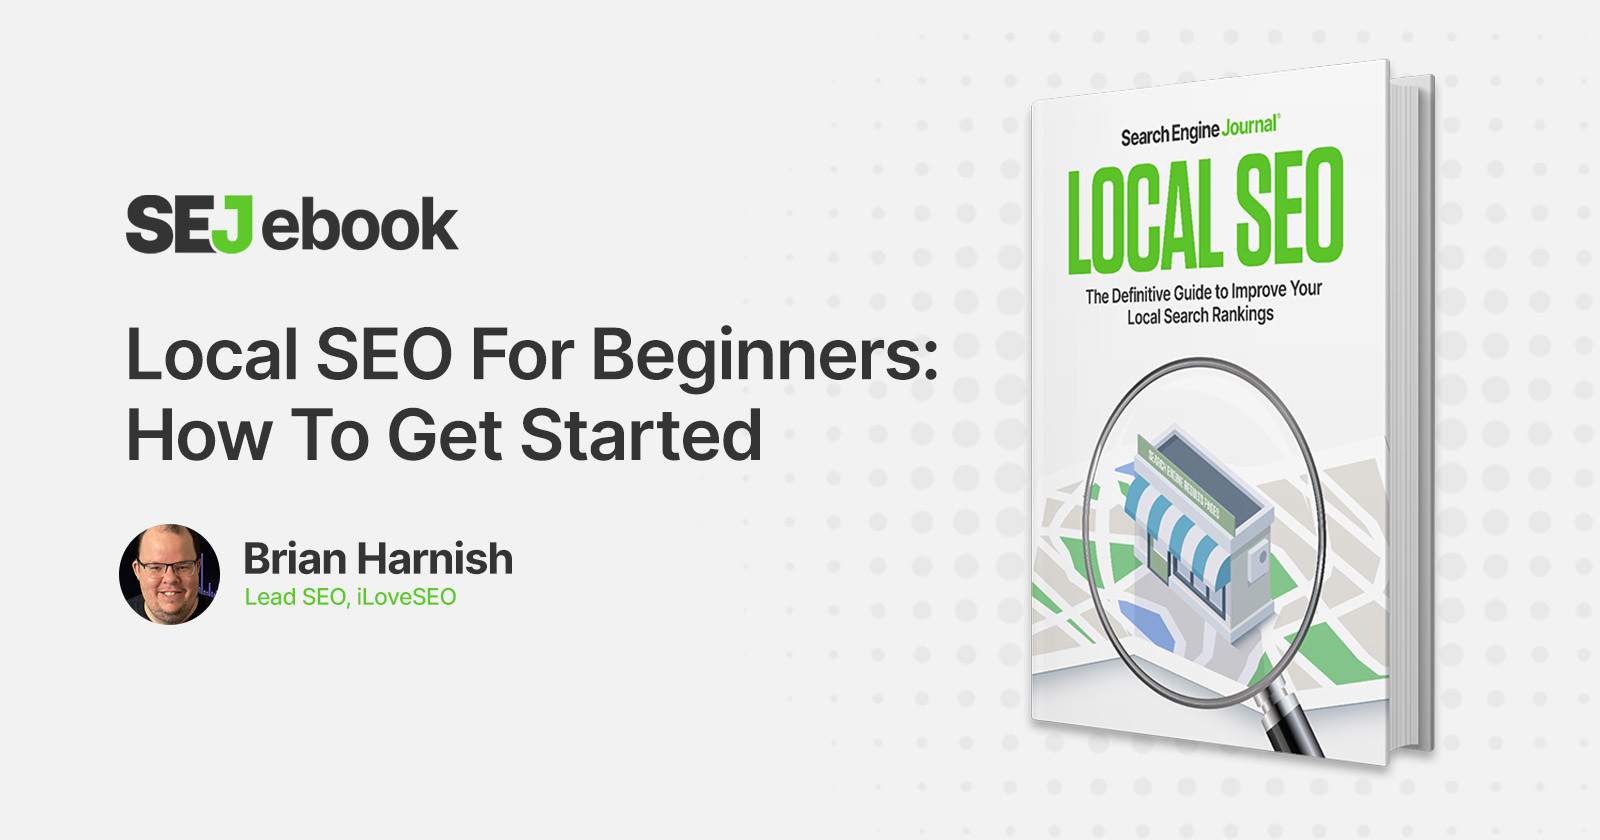 Local SEO For Beginners: Getting Started via @sejournal, @BrianHarnish